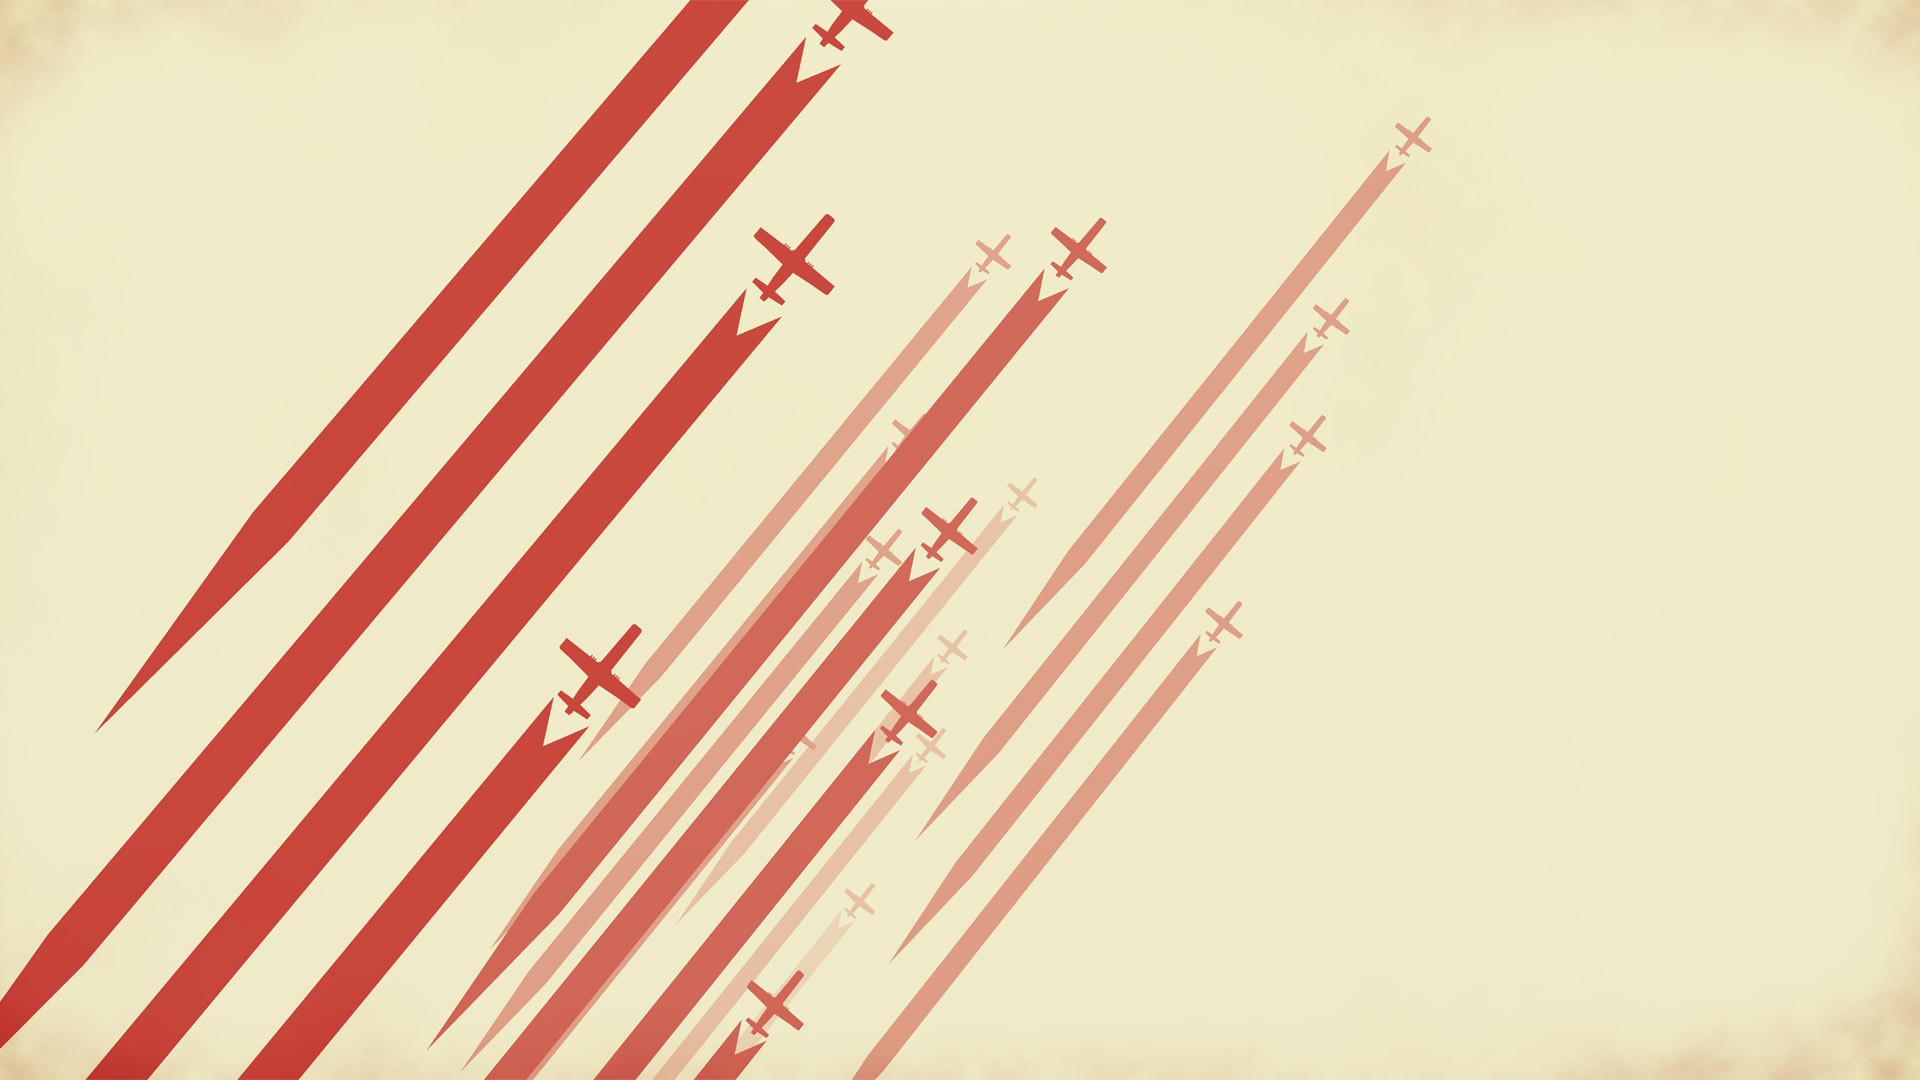 digital Art, Minimalism, Lines, Stripes, Red, Airplane, Aircraft, Simple Background Wallpaper